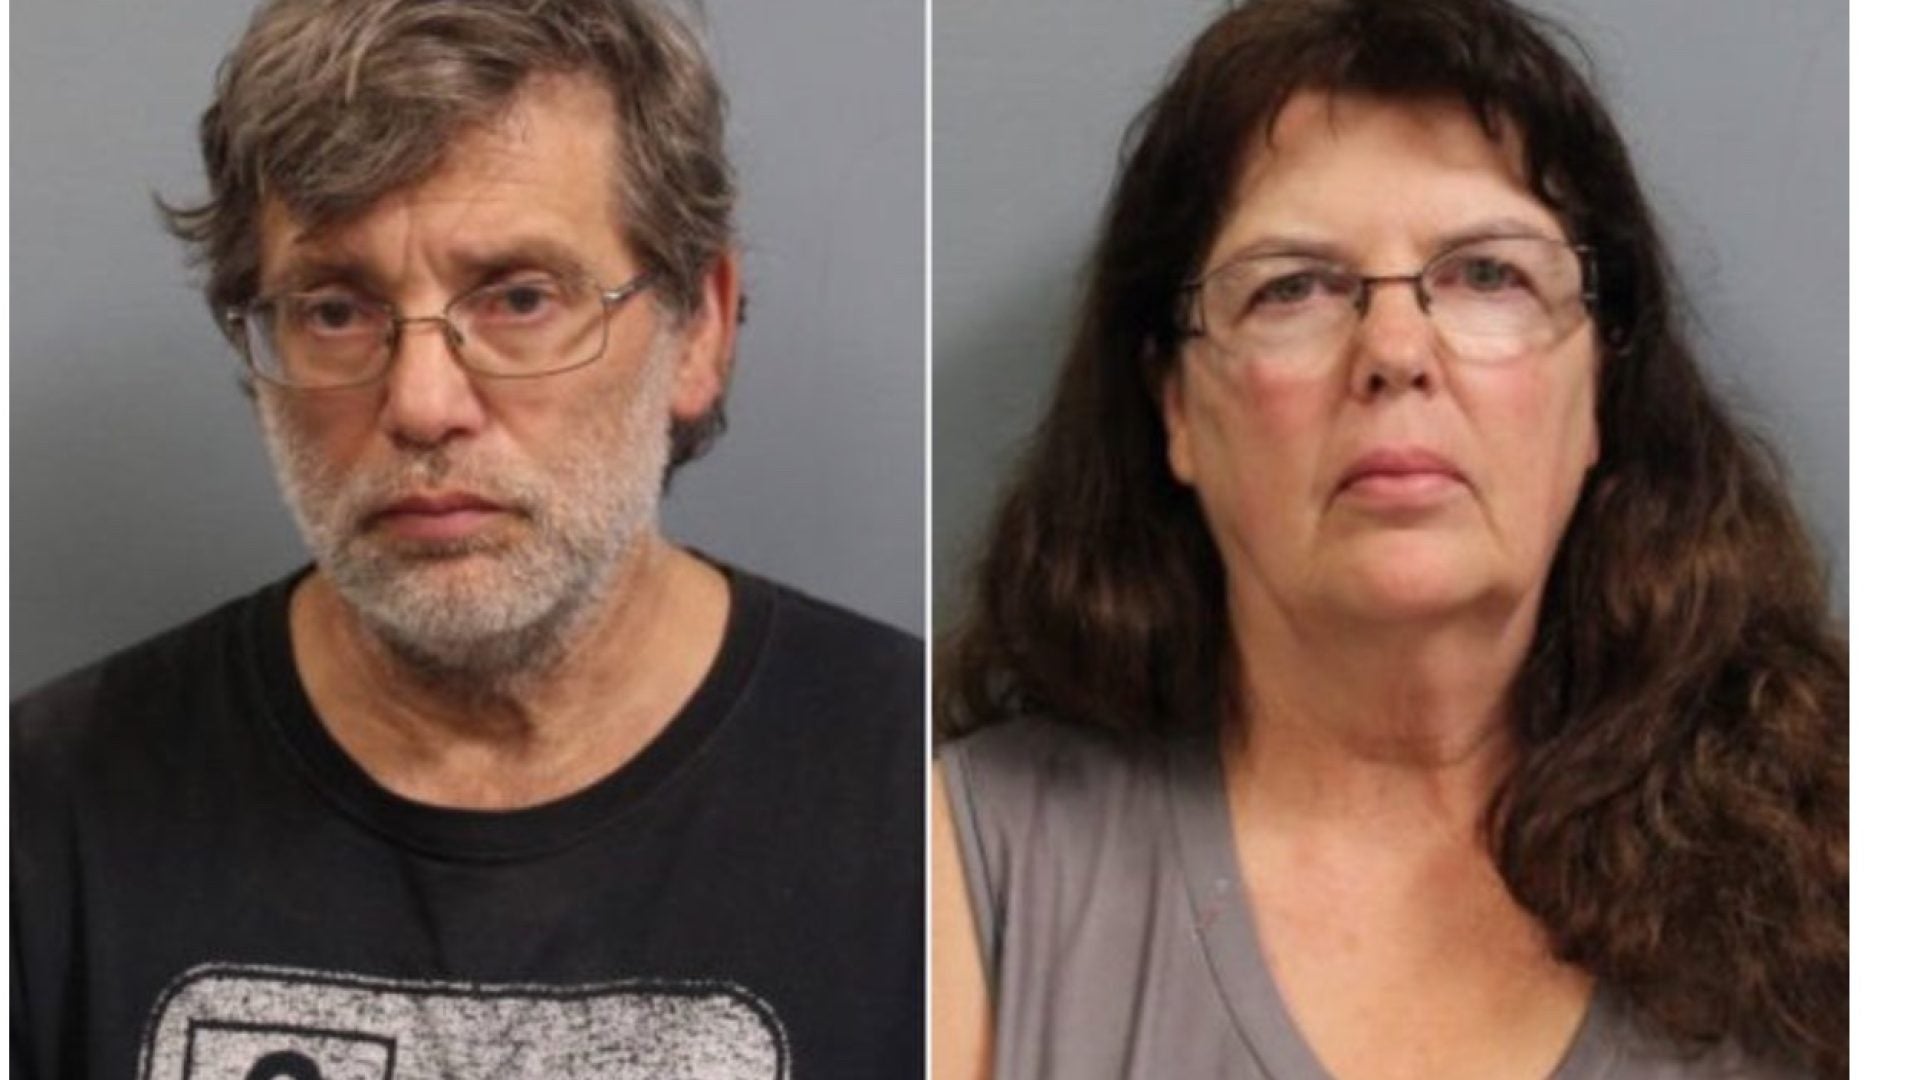 White Couple Accused Of Adopting Black Children And Forcing Them To Work “As Slaves” On Their Farm In West Virginia